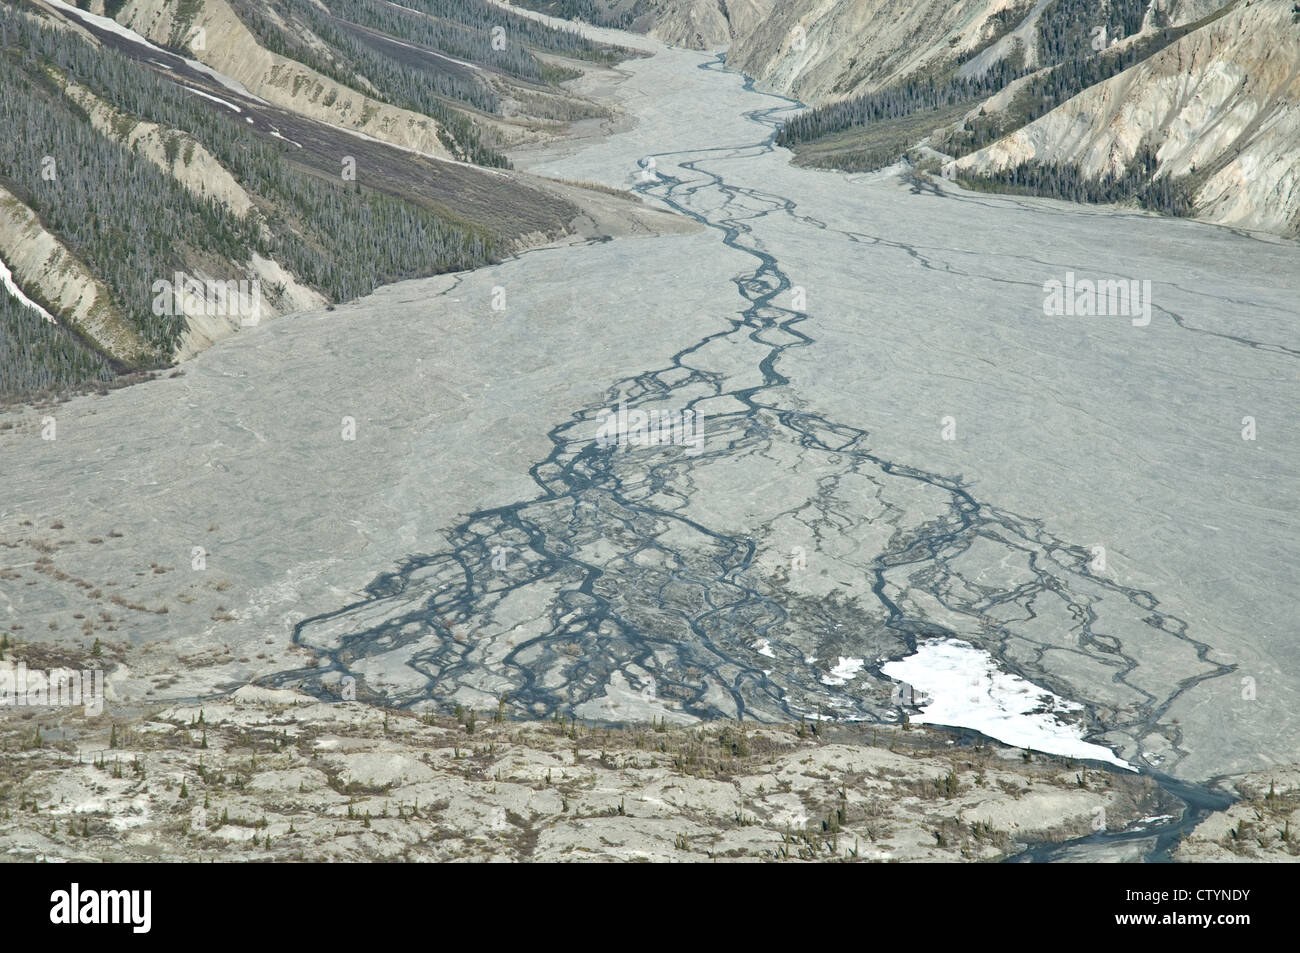 An aerial view of a boreal tributary river flowing towards the Slims River in Kluane National Park, in the Yukon Territory, Canada. Stock Photo